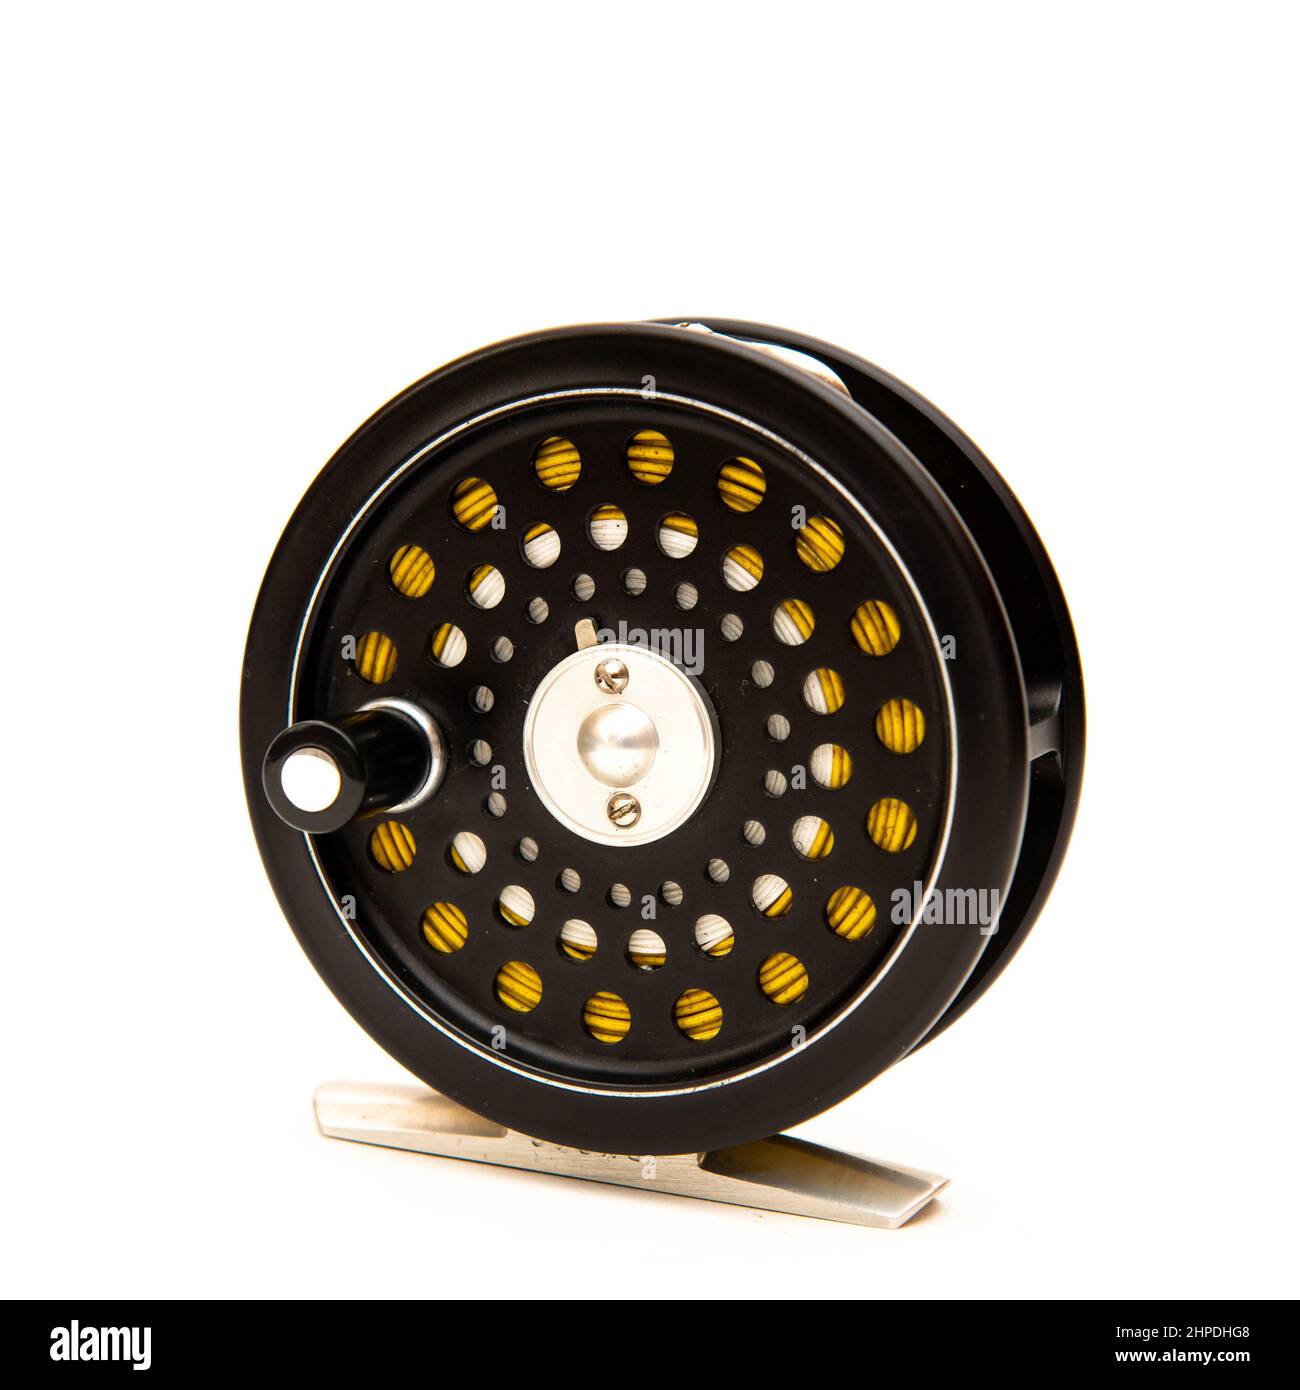 Hardy bros golden flyweight fly reel Archives - Antique and Vintage Fishing  Tackle